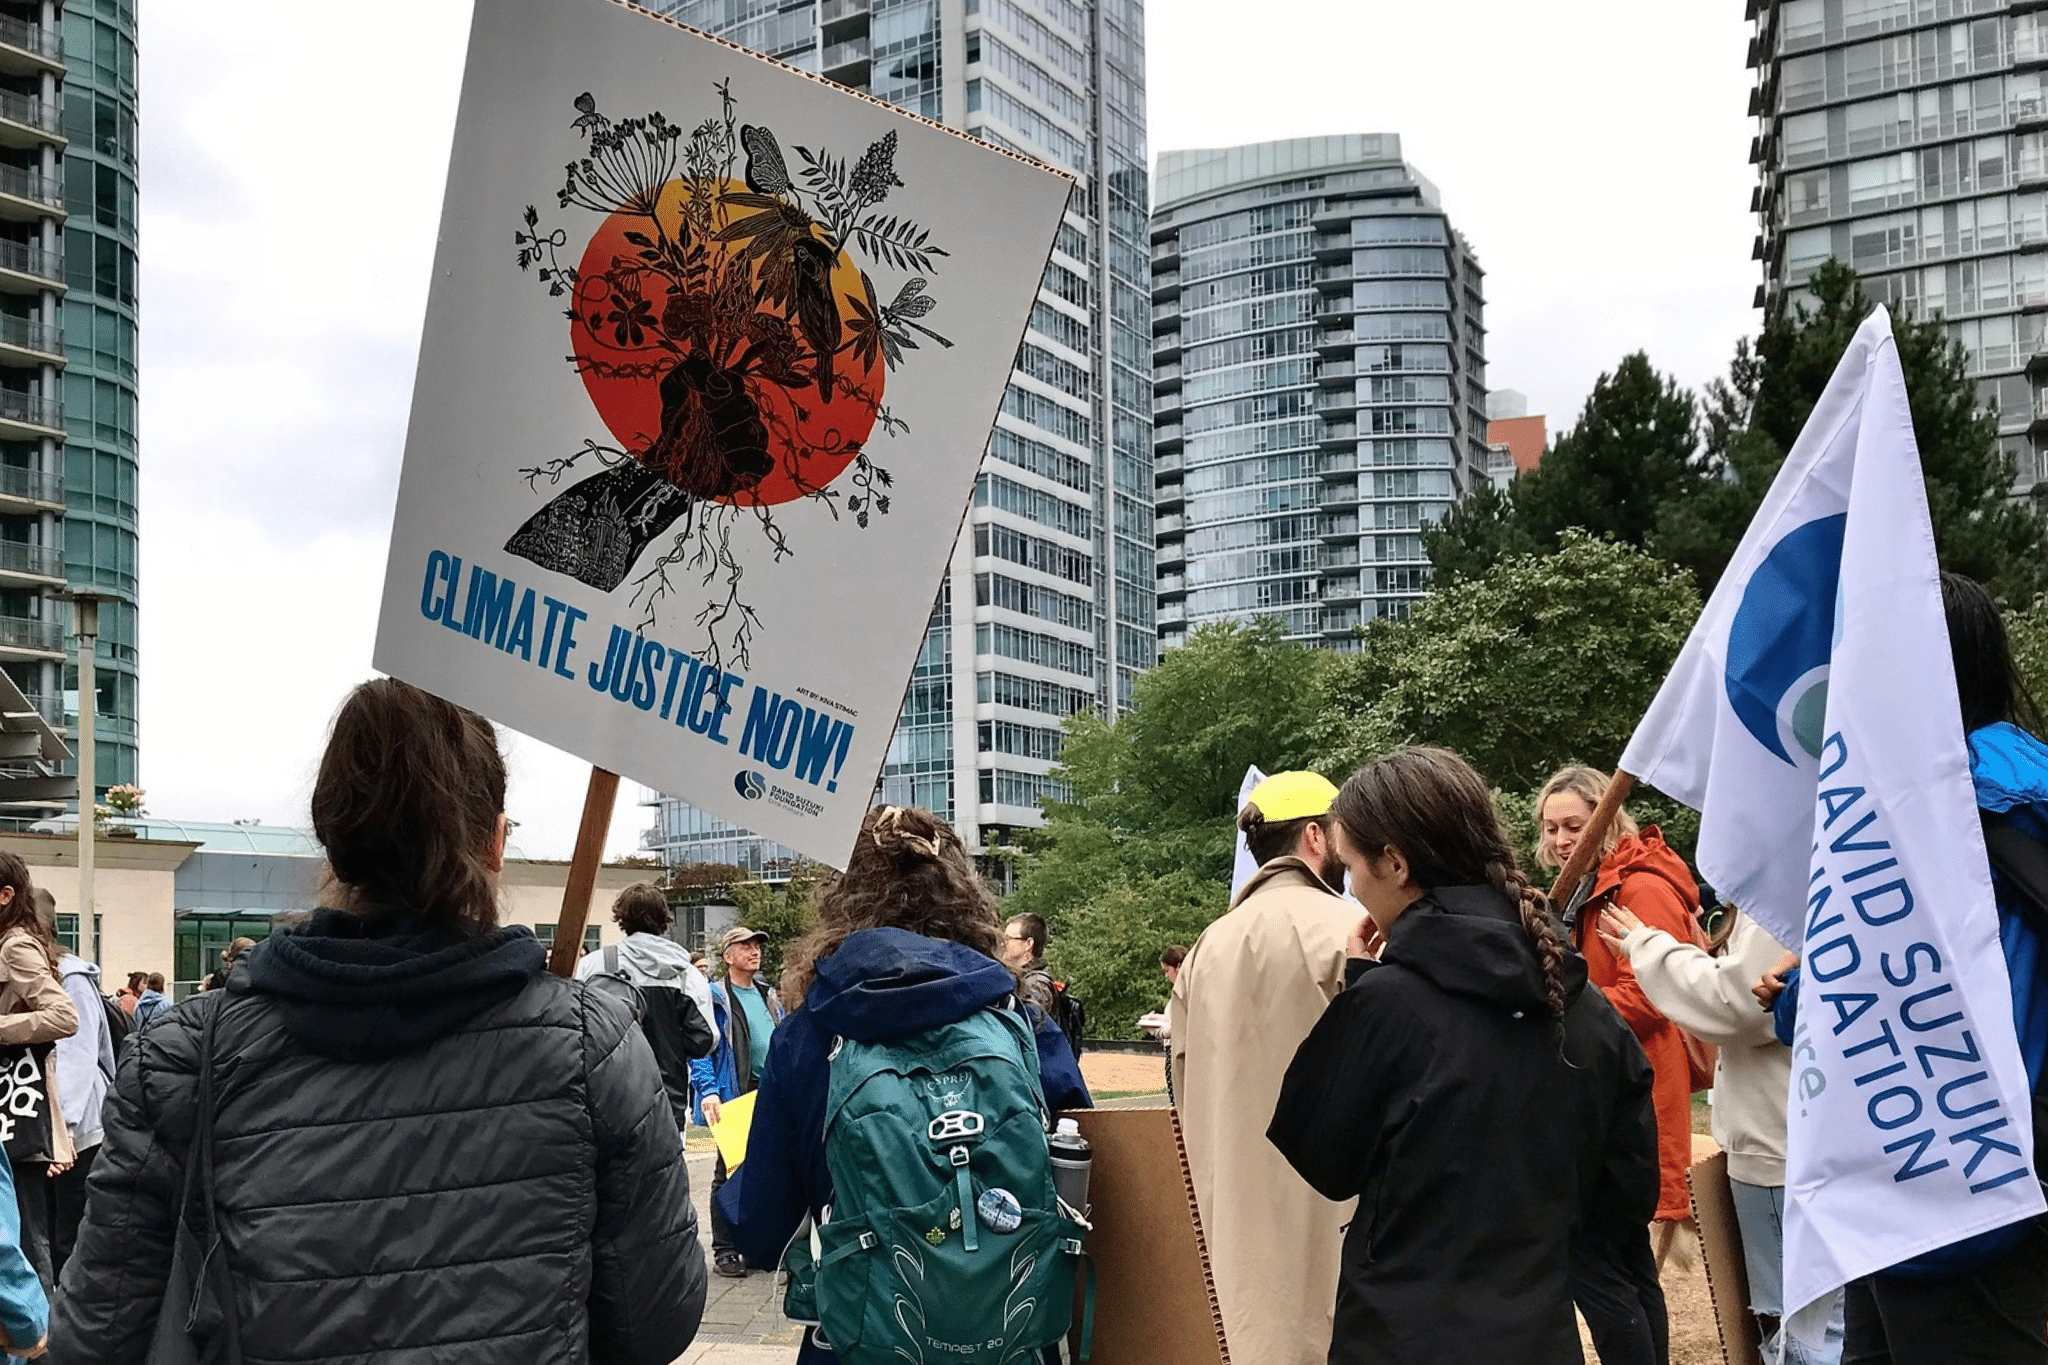 Groups of climate demonstrators